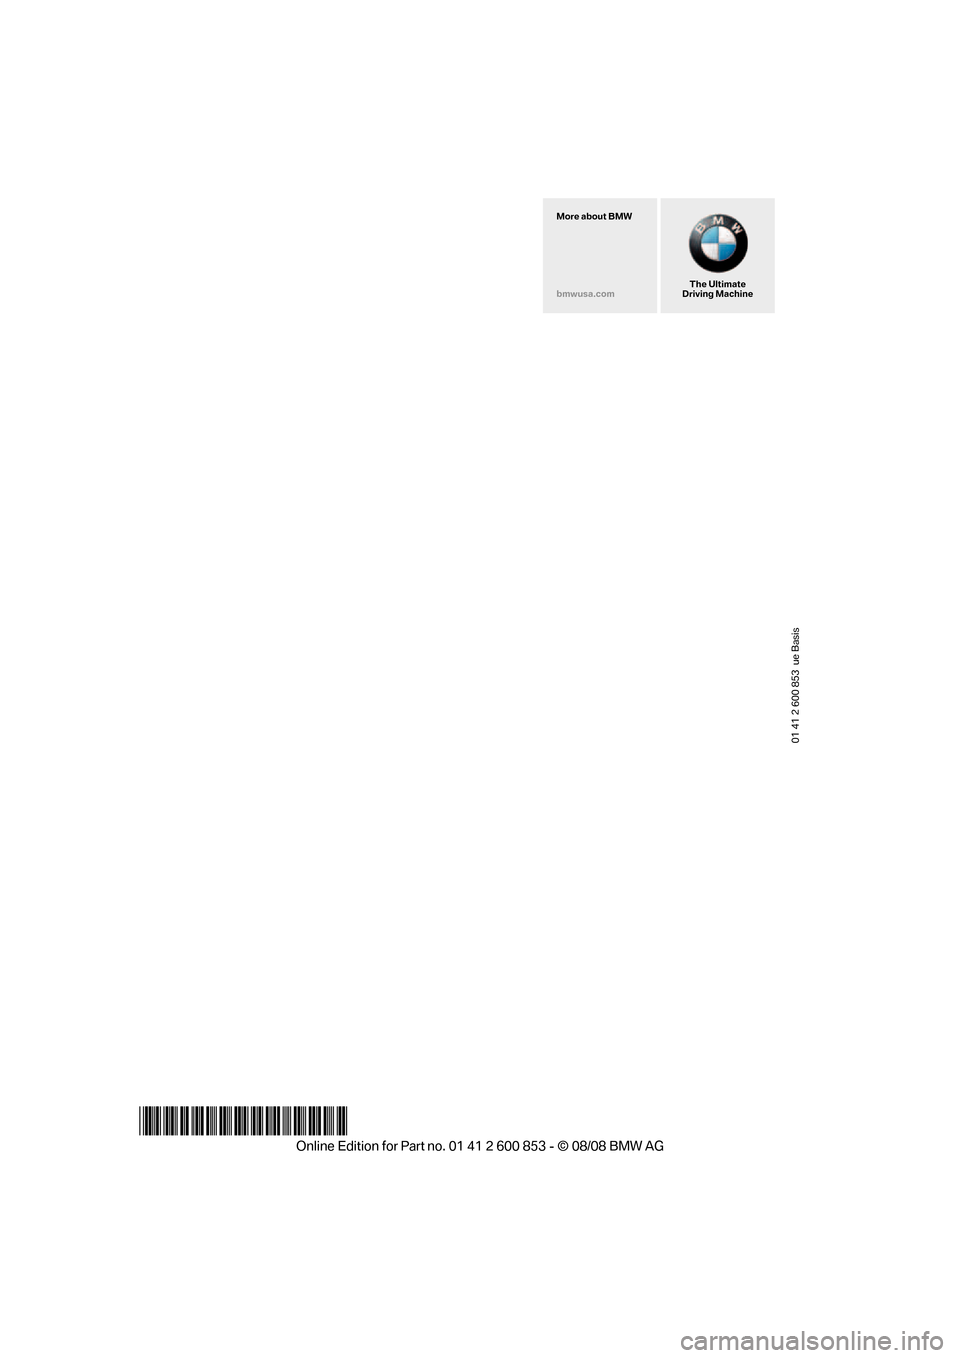 BMW 135I 2009 E81 Owners Manual 01 41 2 600 853  ue Basis
*BL260085300W*
The Ultimate
Driving Machine More about BMW
bmwusa.com 